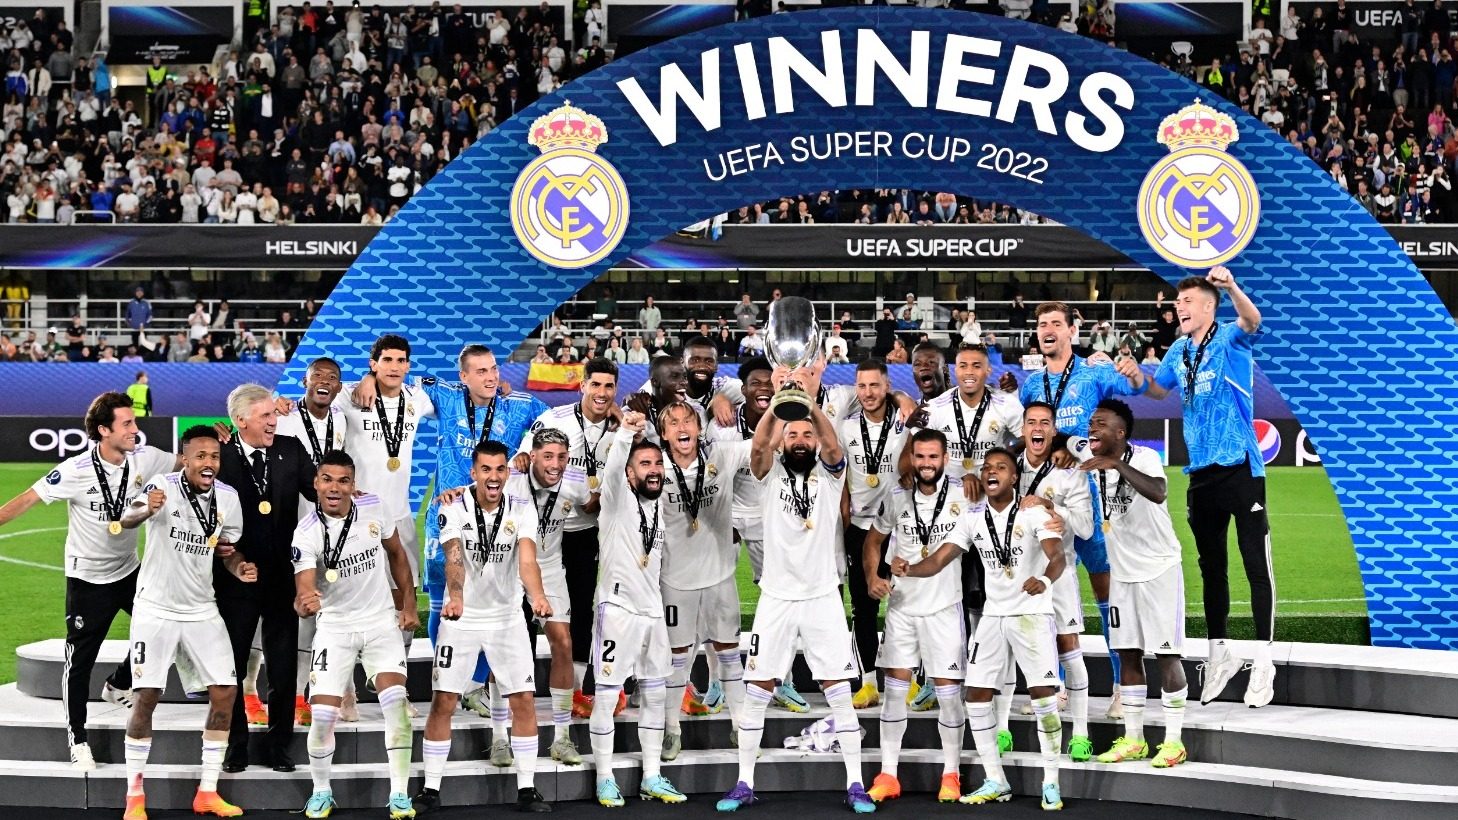 UEFA Super Cup winners list: Know the champions from each edition